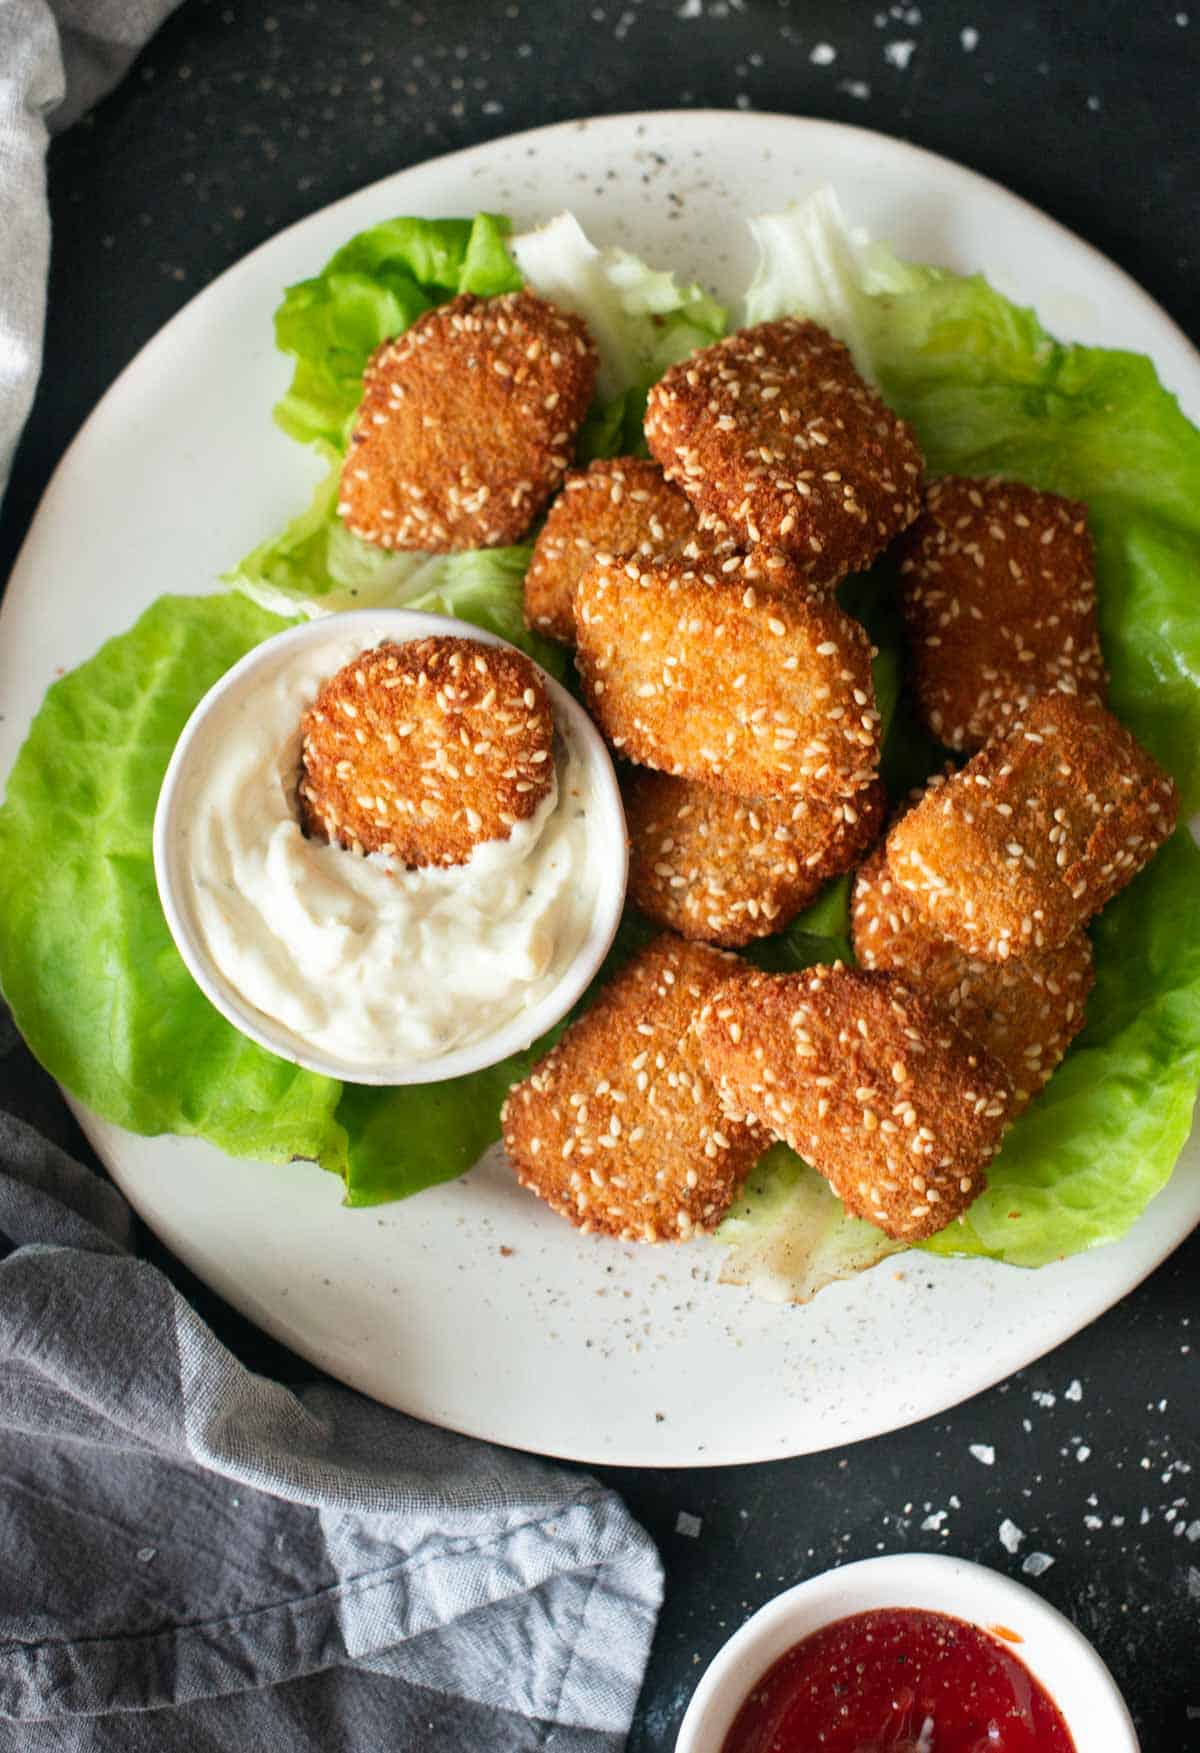 Image: Chickpea nuggets